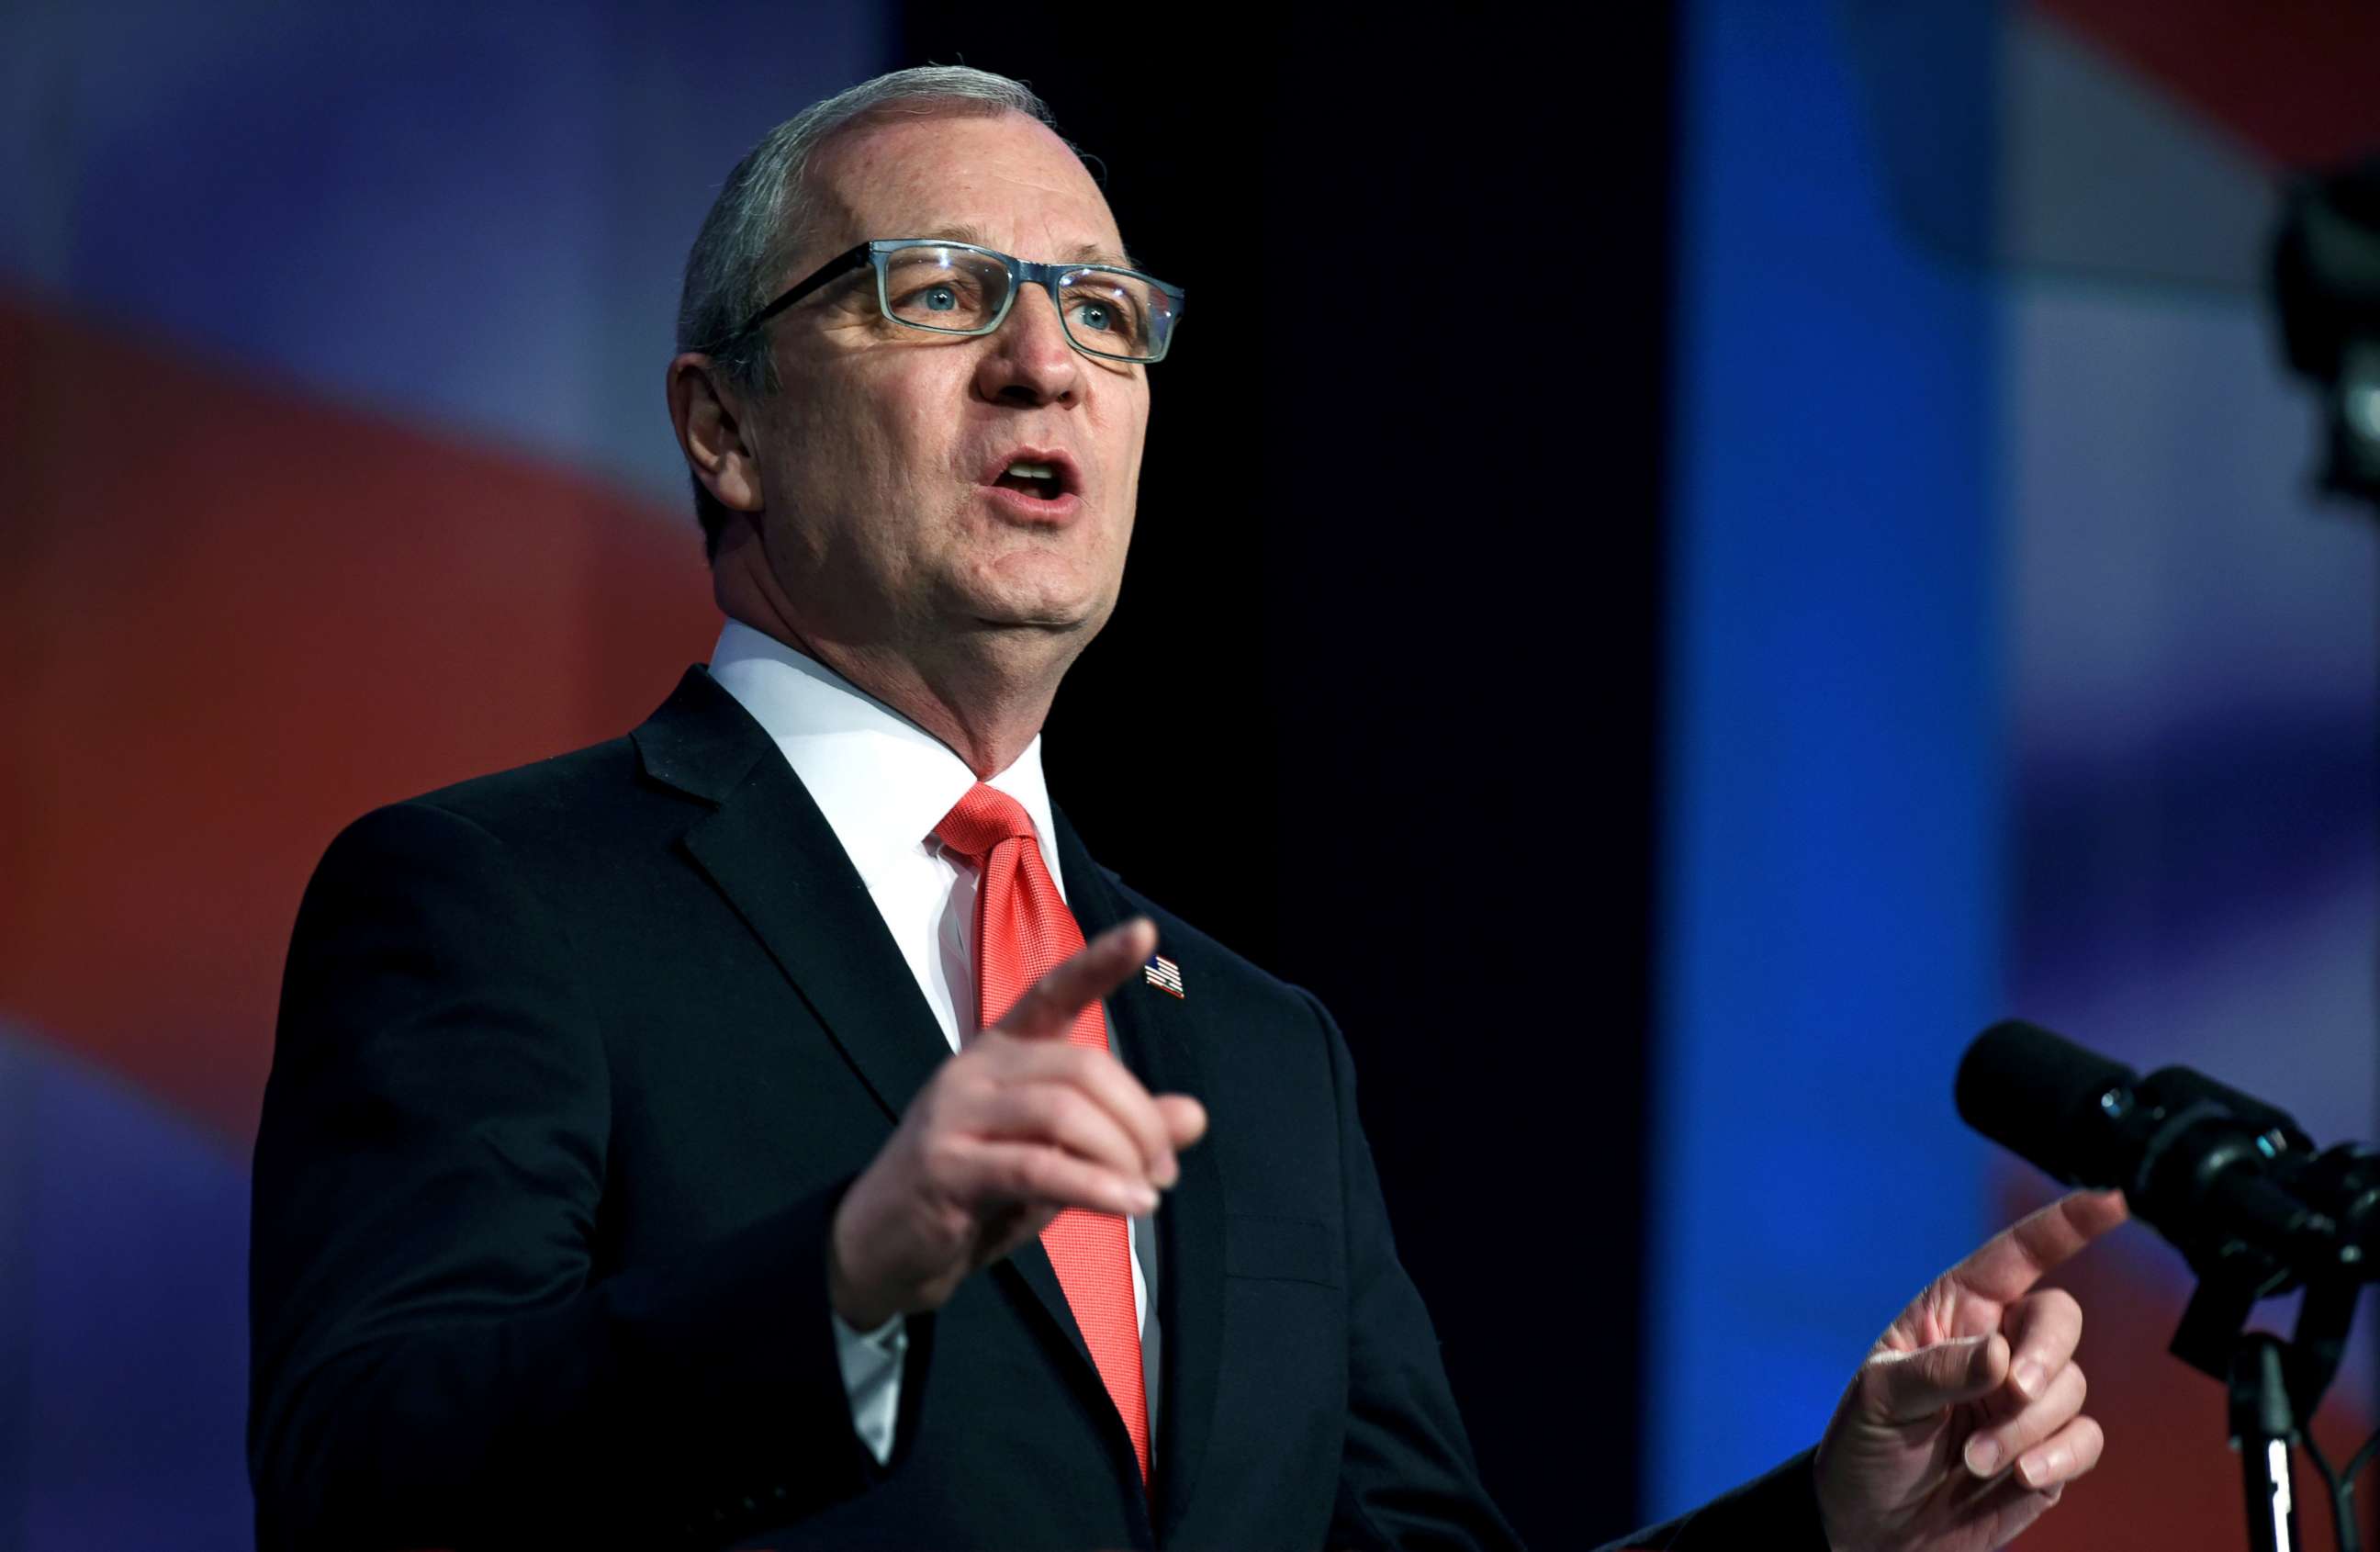 PHOTO: Representative Kevin Cramer speaks at the 2018 North Dakota Republican Party Convention in Grand Forks, N.D., April 7, 2018.